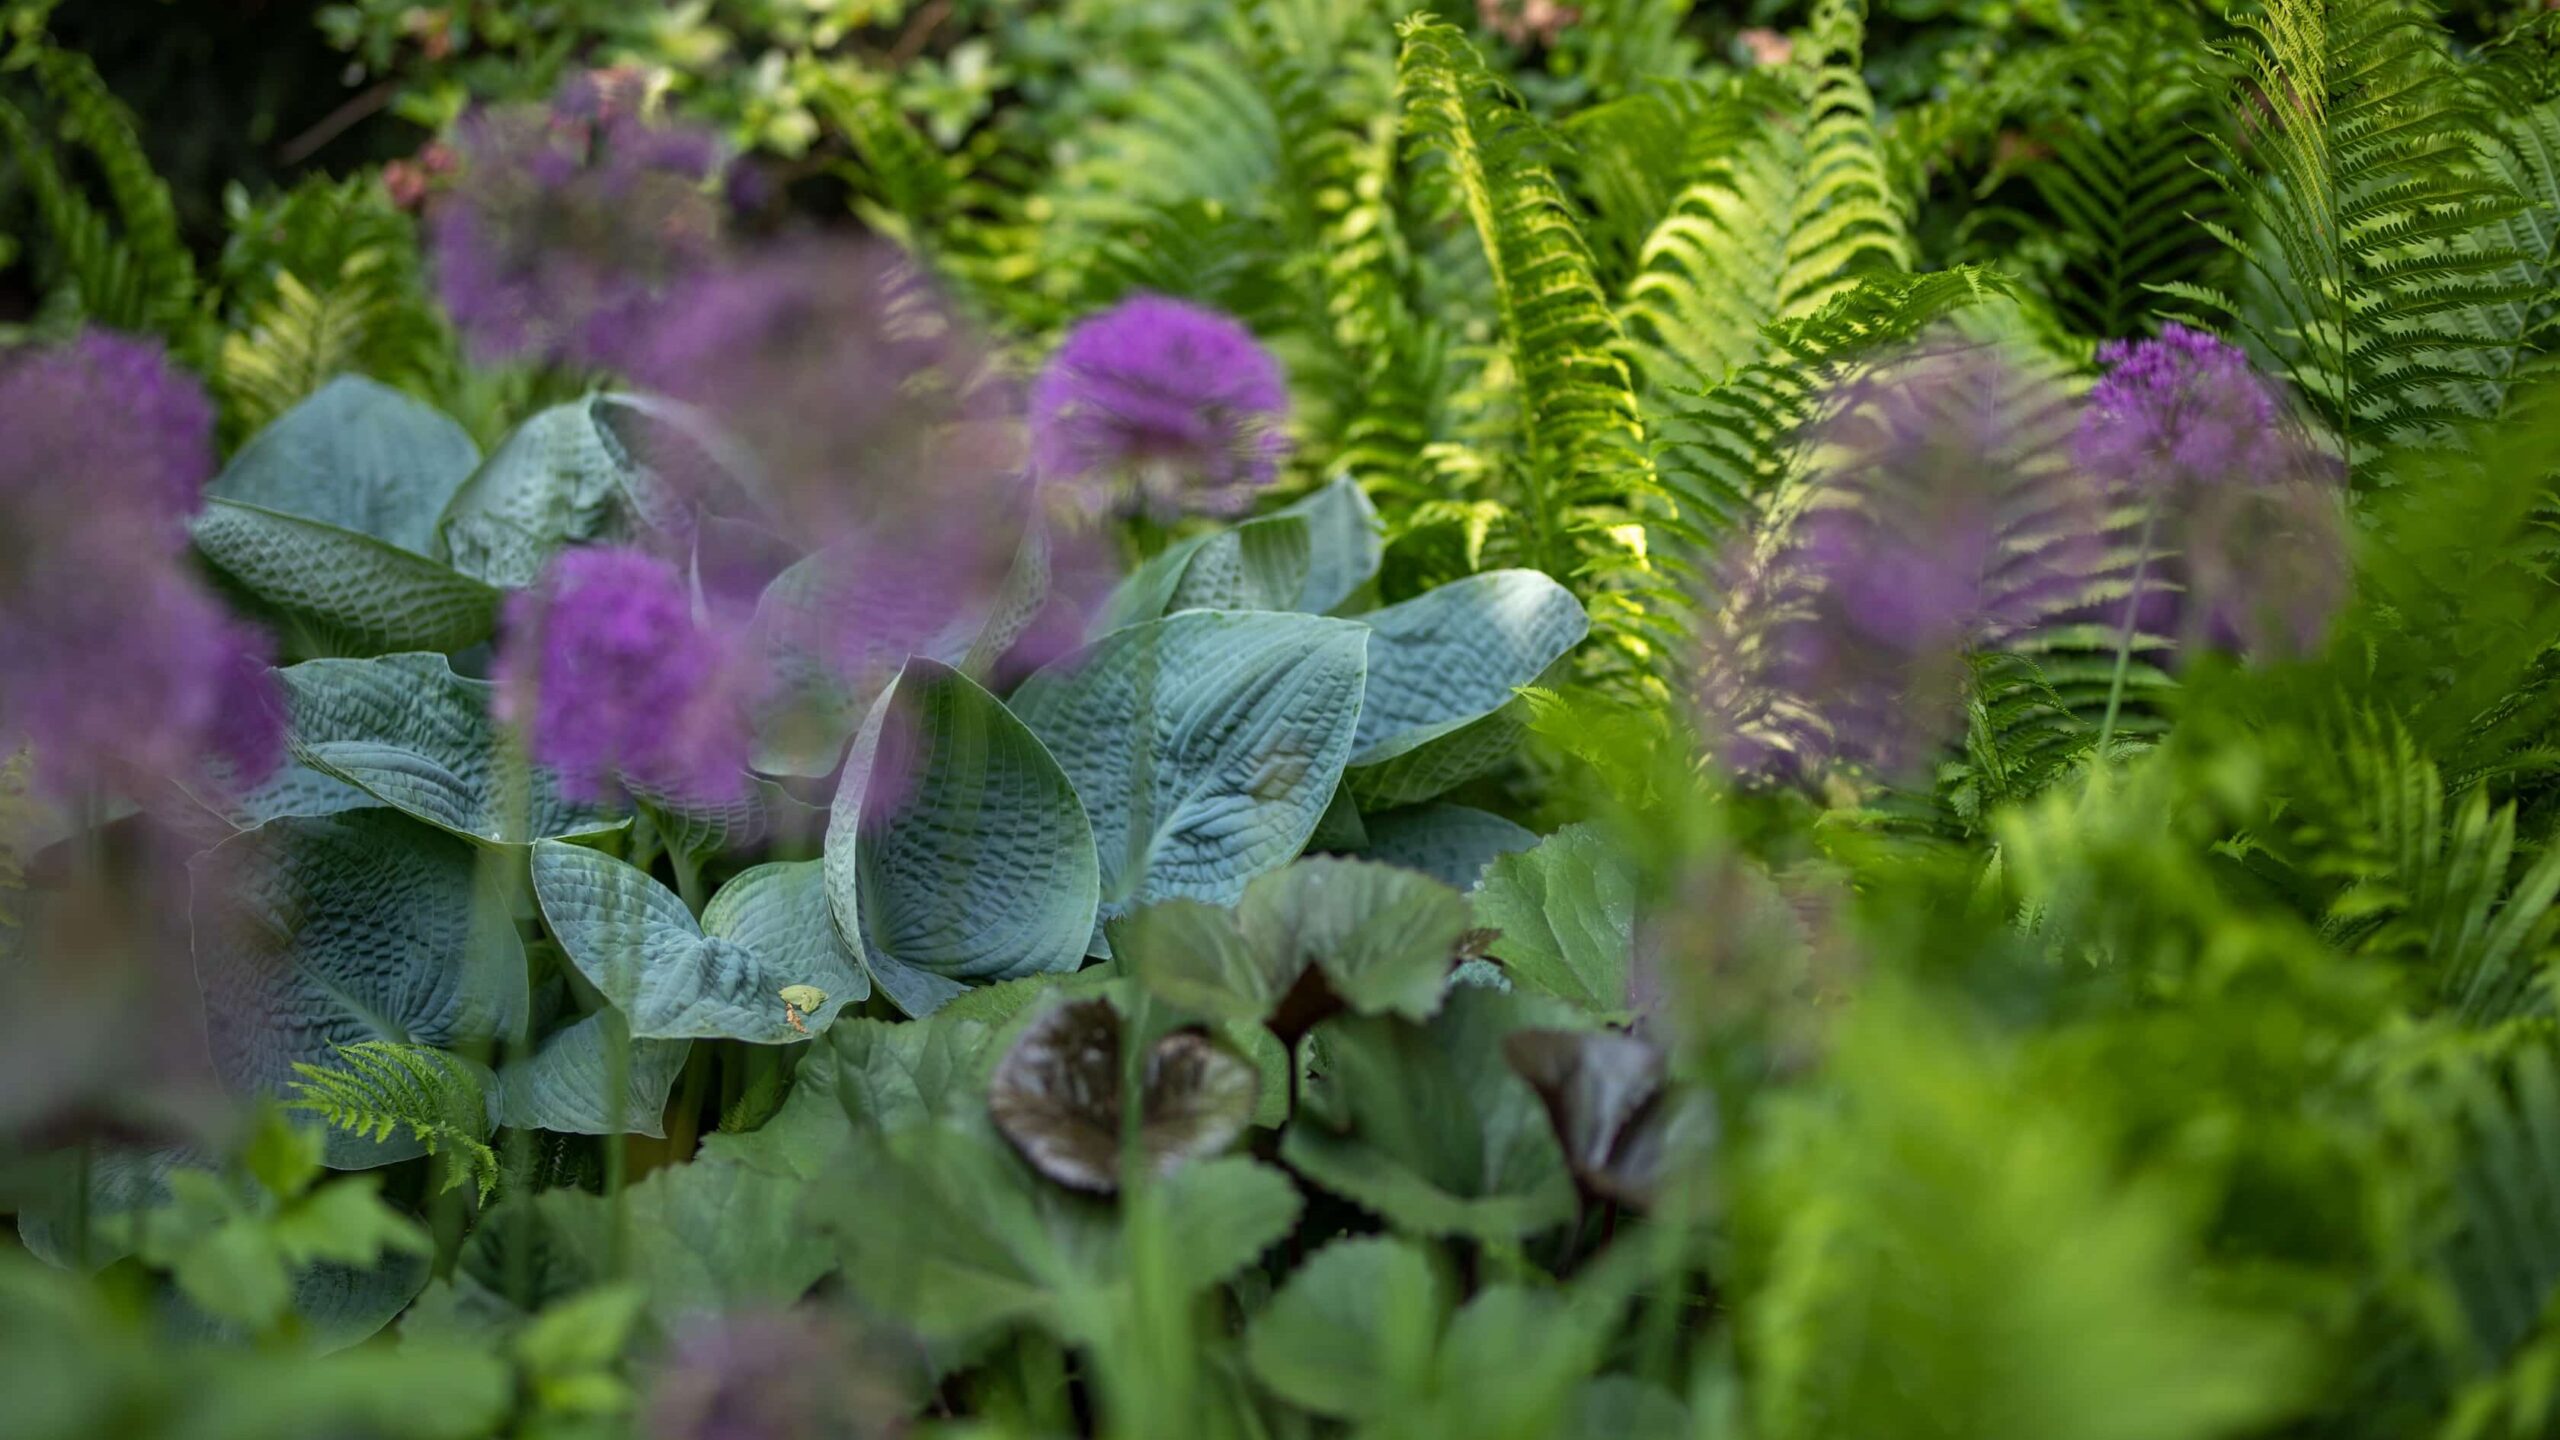 Perfect Shade Garden with Hostas and Ferns